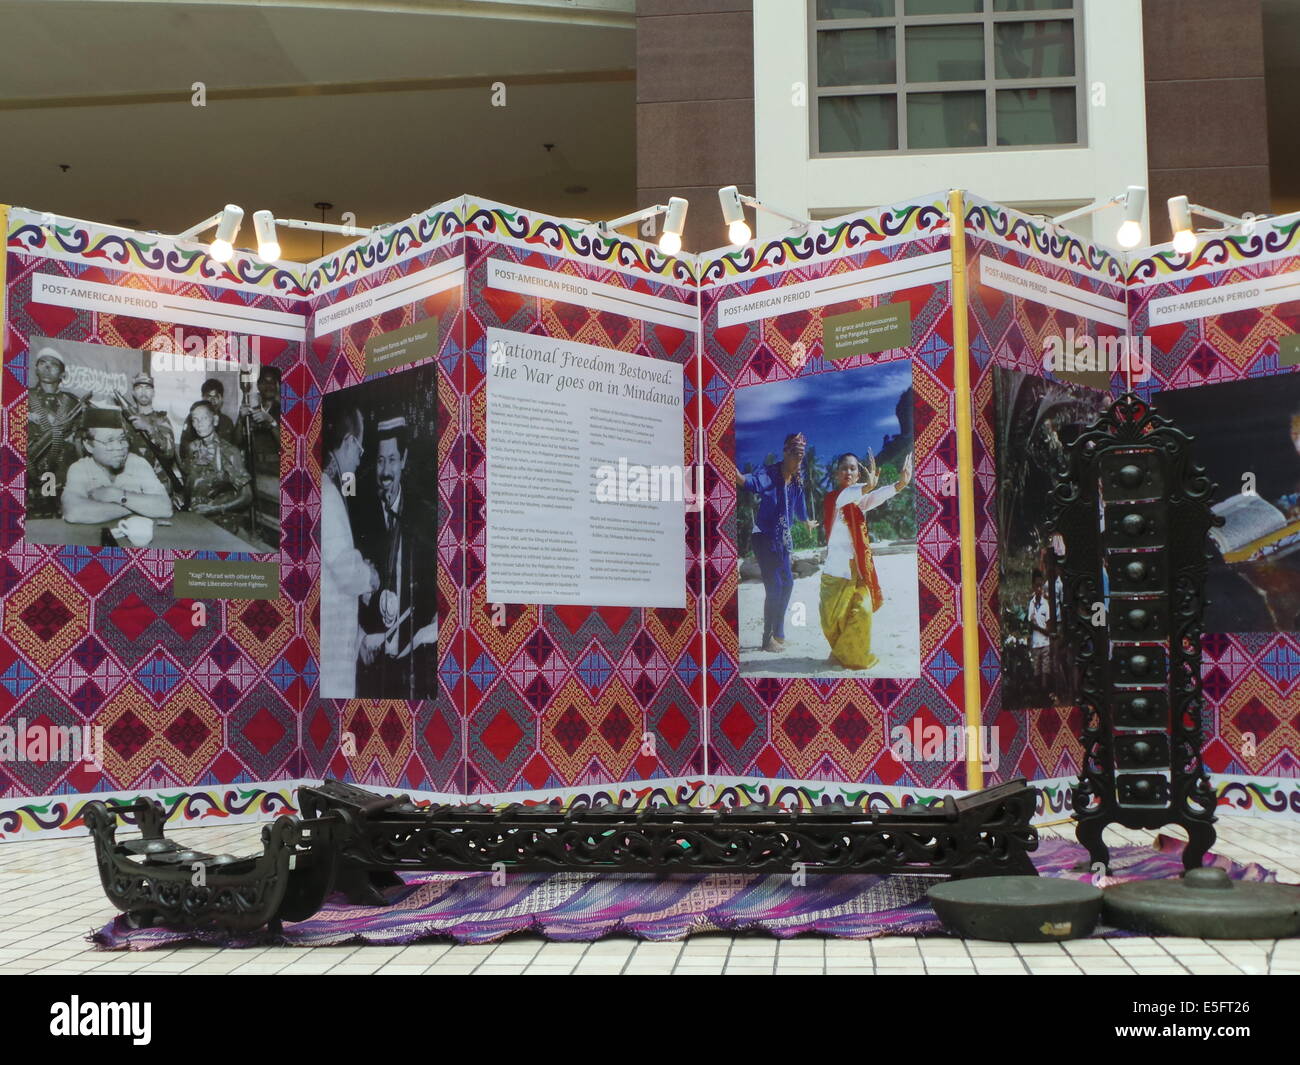 Gallery time-lining the 'peace struggles' of Muslims in war-torn Mindanao during the Eid'l Fitr Festival in Newport Mall in Pasay City, which showcases Muslim culture and tradition in the Philippines. © Sherbien Dacalanio/Pacific Press/Alamy Live News Stock Photo